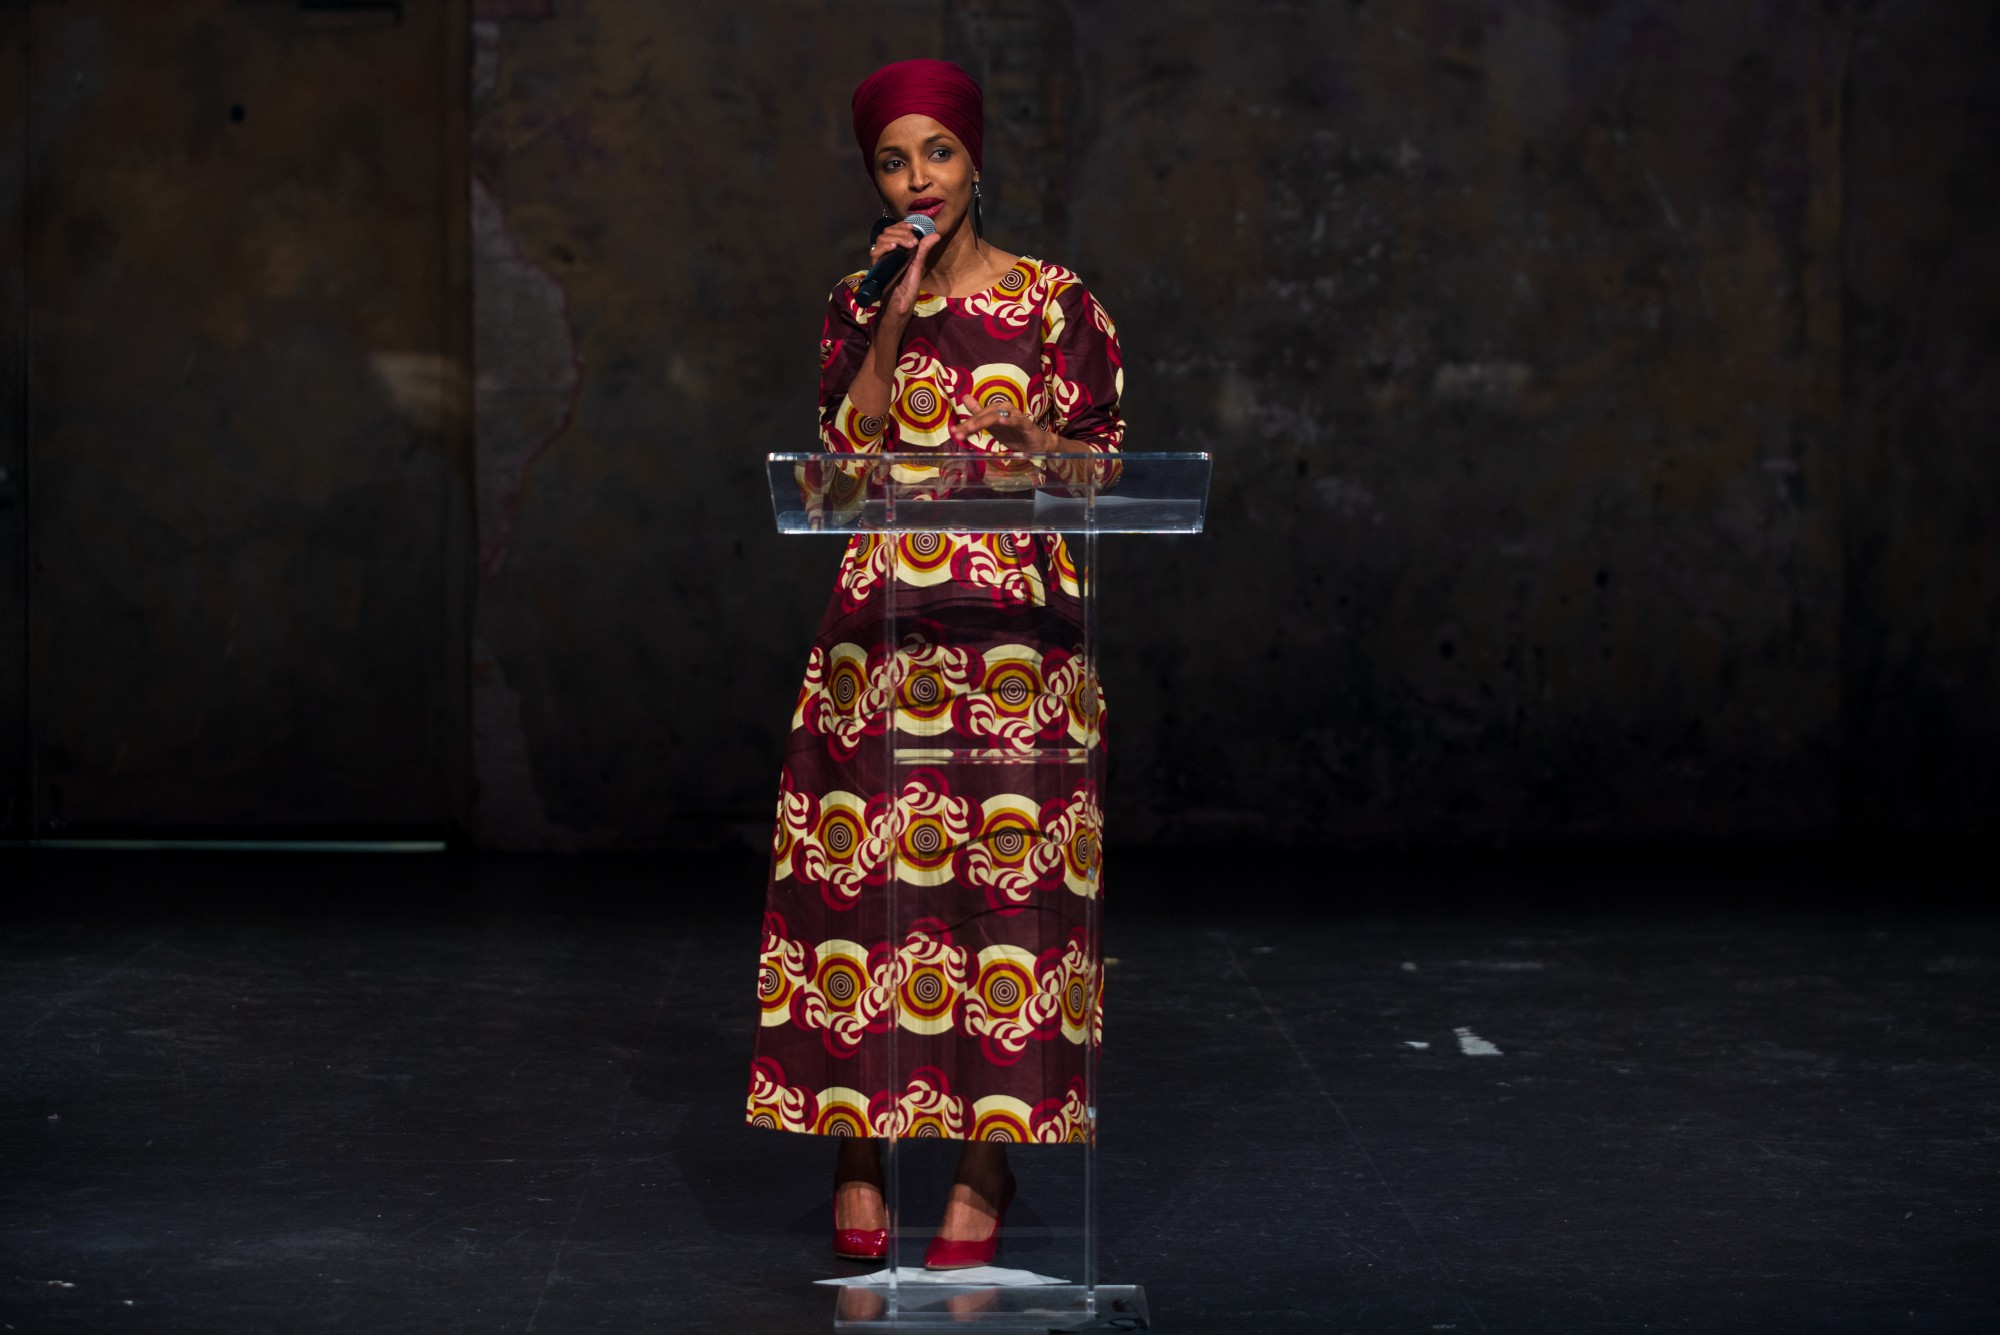 Congresswoman Ilhan Omar addresses an audience at Ilhan Omar 2020 Reelection Kickoff: “Send Her Back to Congress” at Aria on Thursday, Jan. 23, 2020. (Nur B. Adam / Minnesota Daily)